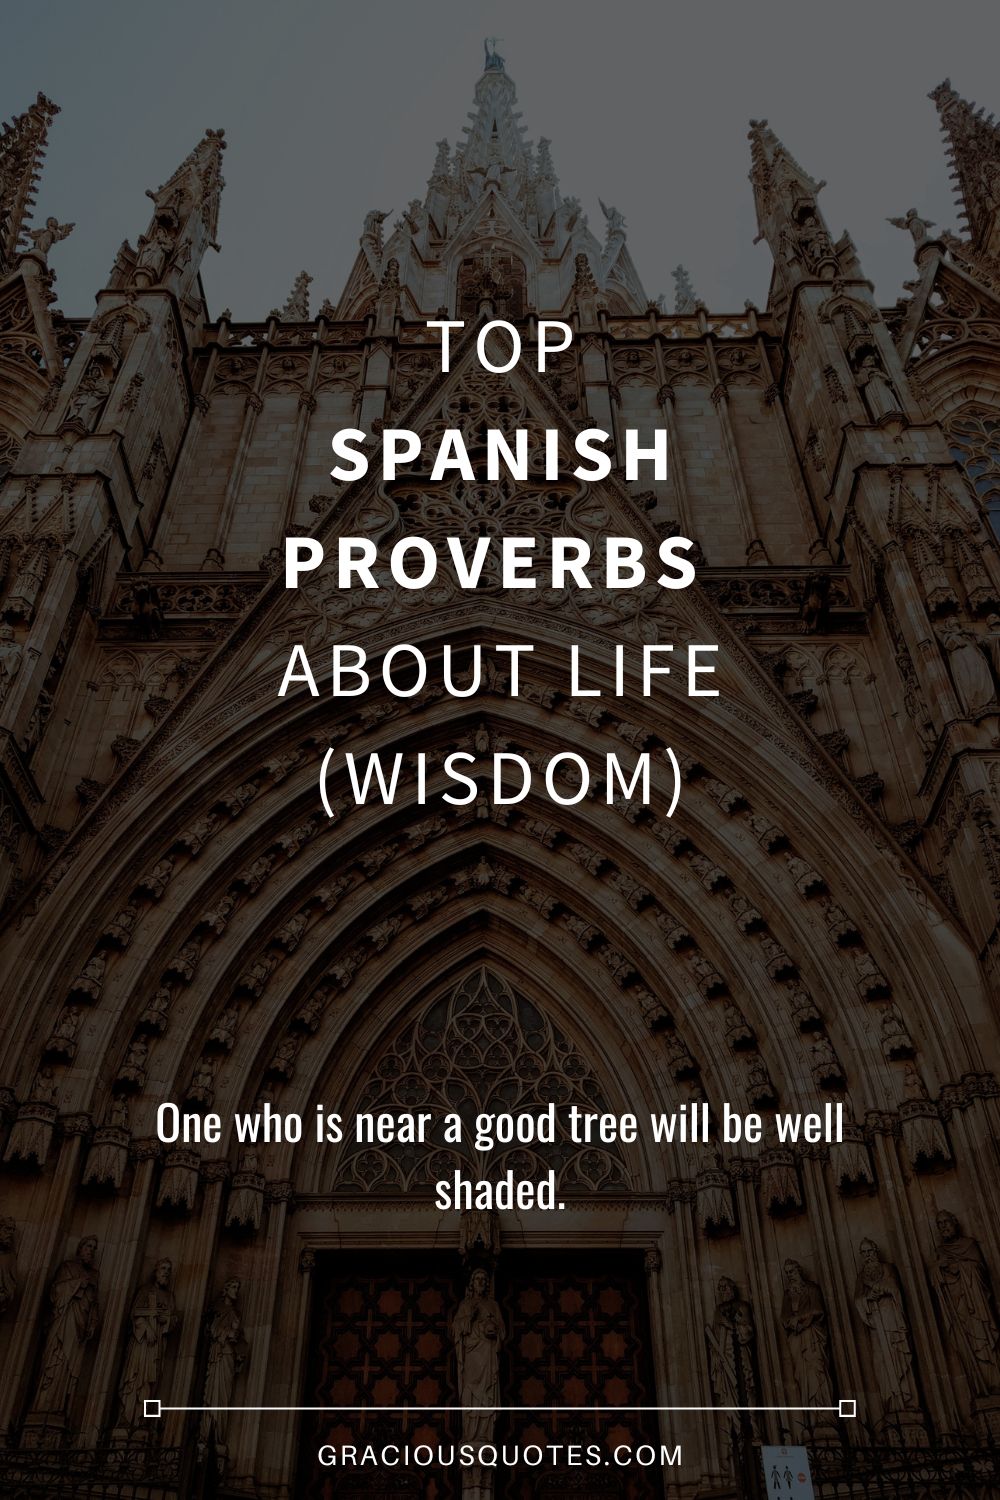 top Spanish Proverbs About Life (WISDOM) - Gracious Quotes